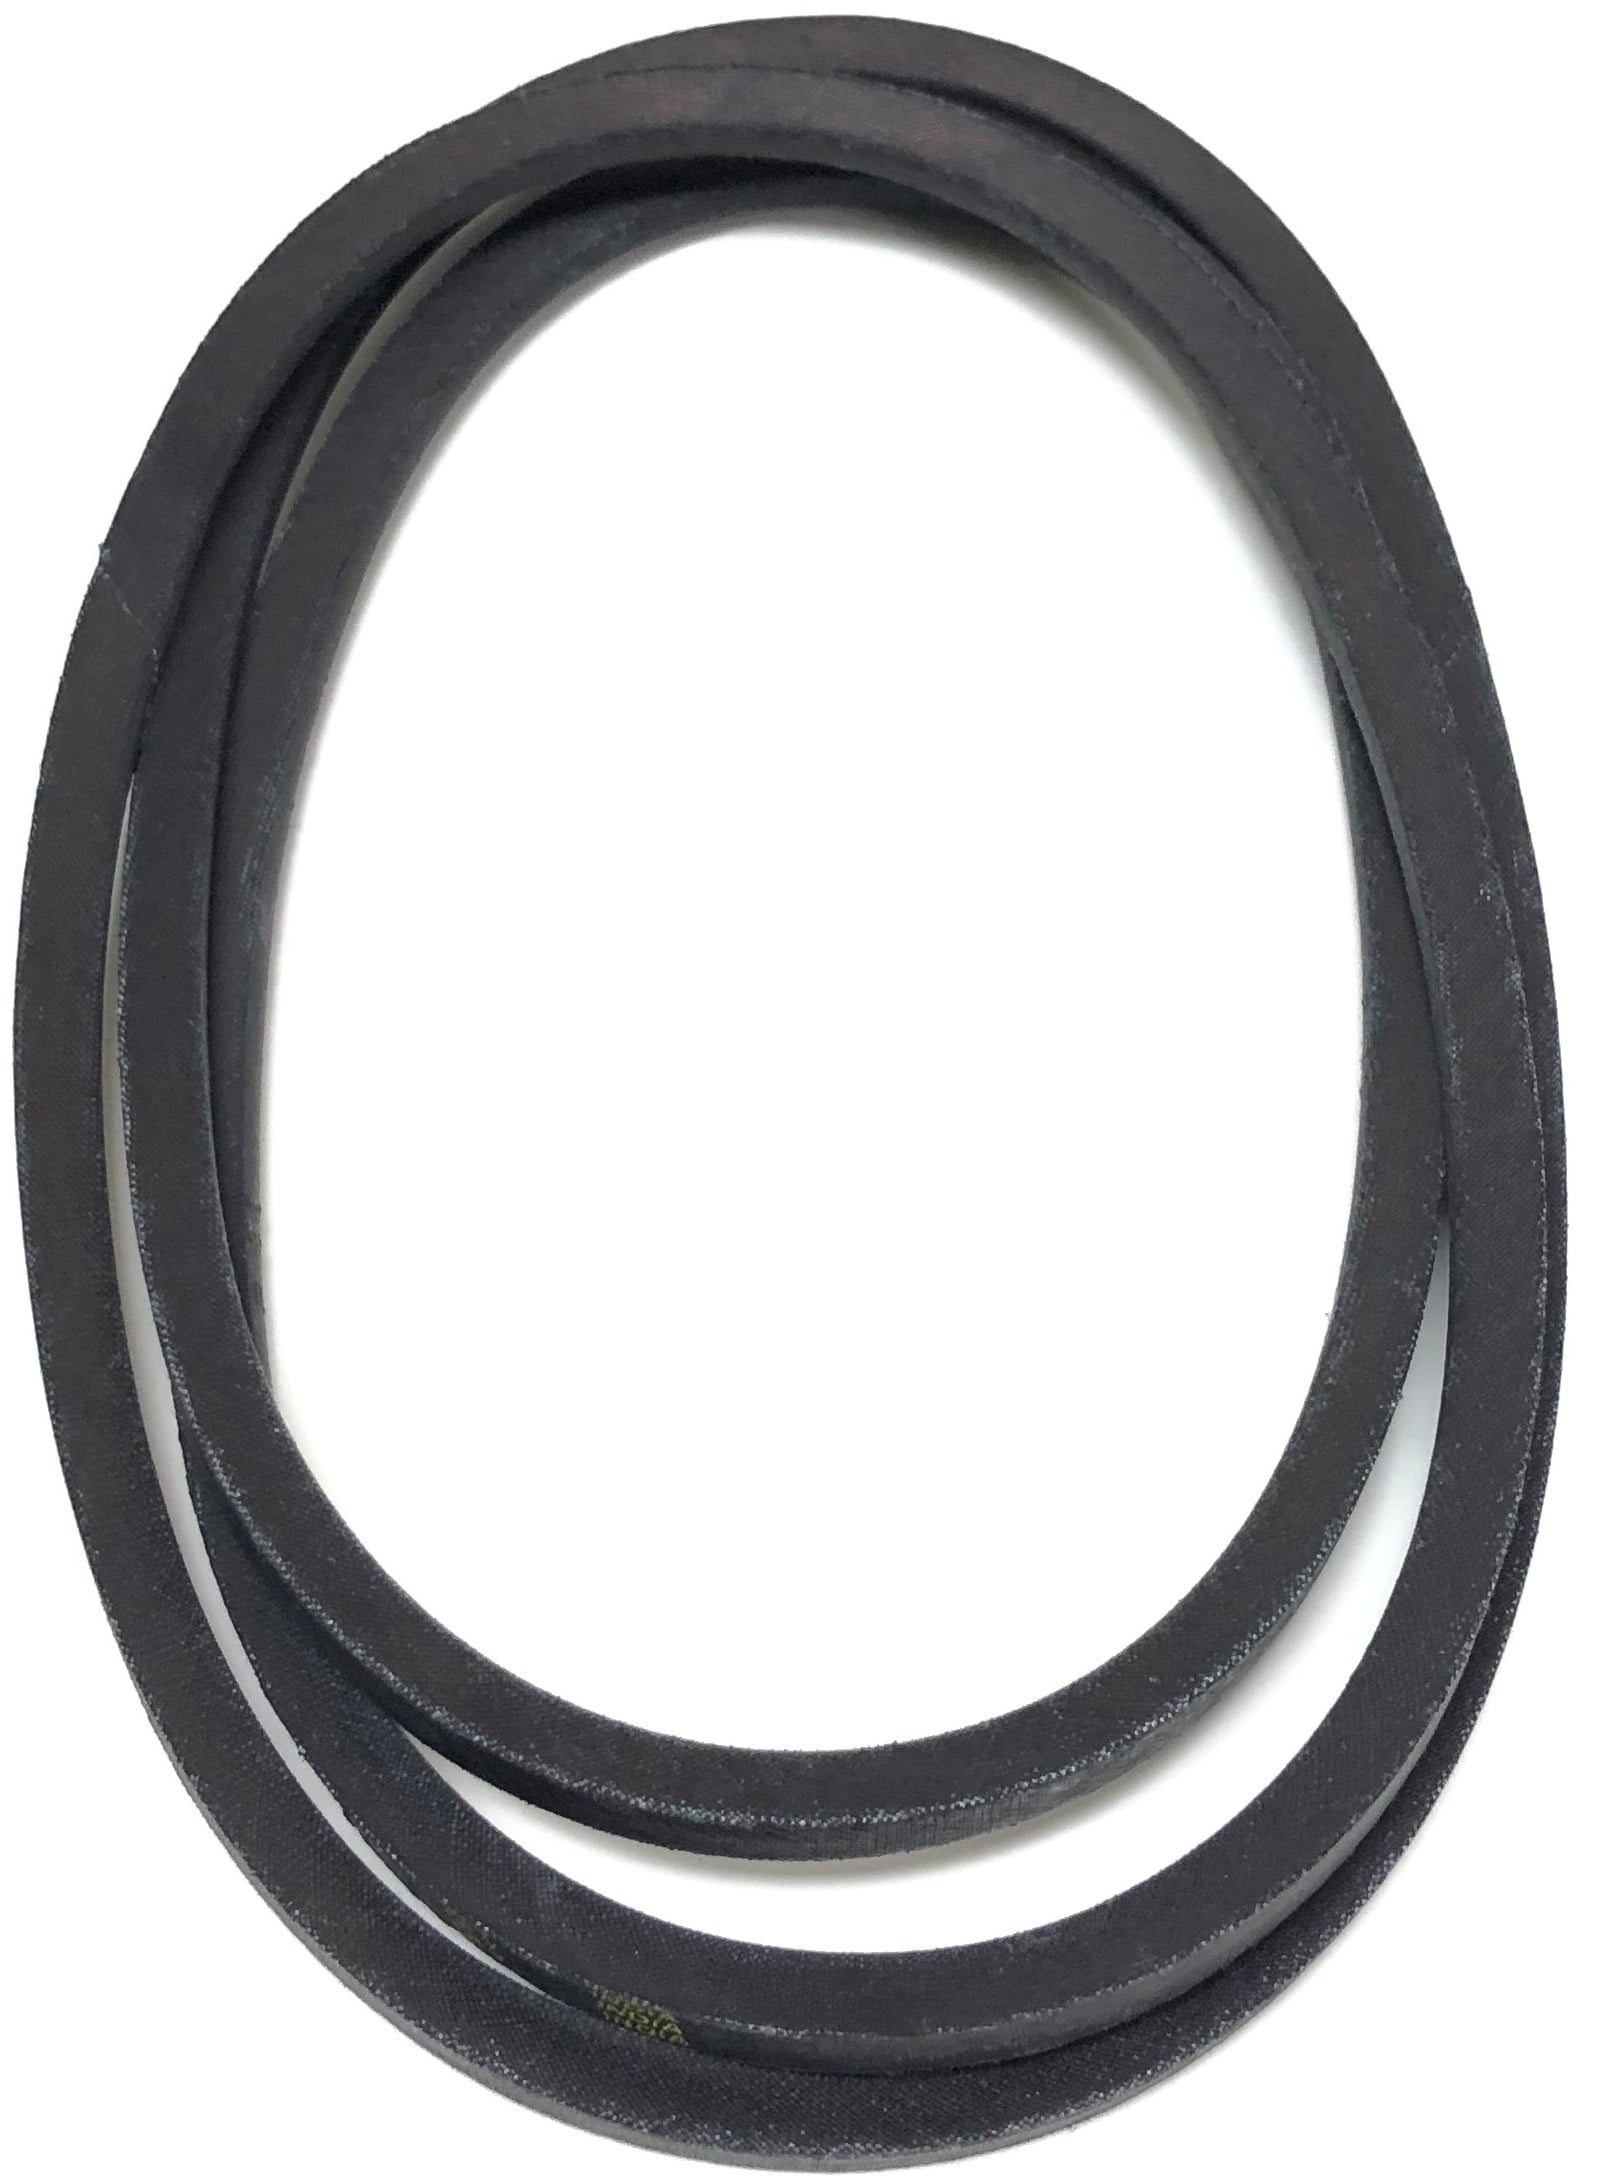 AYP AMERICAN YARD PRODUCTS 110884X made with Kevlar Replacement Belt